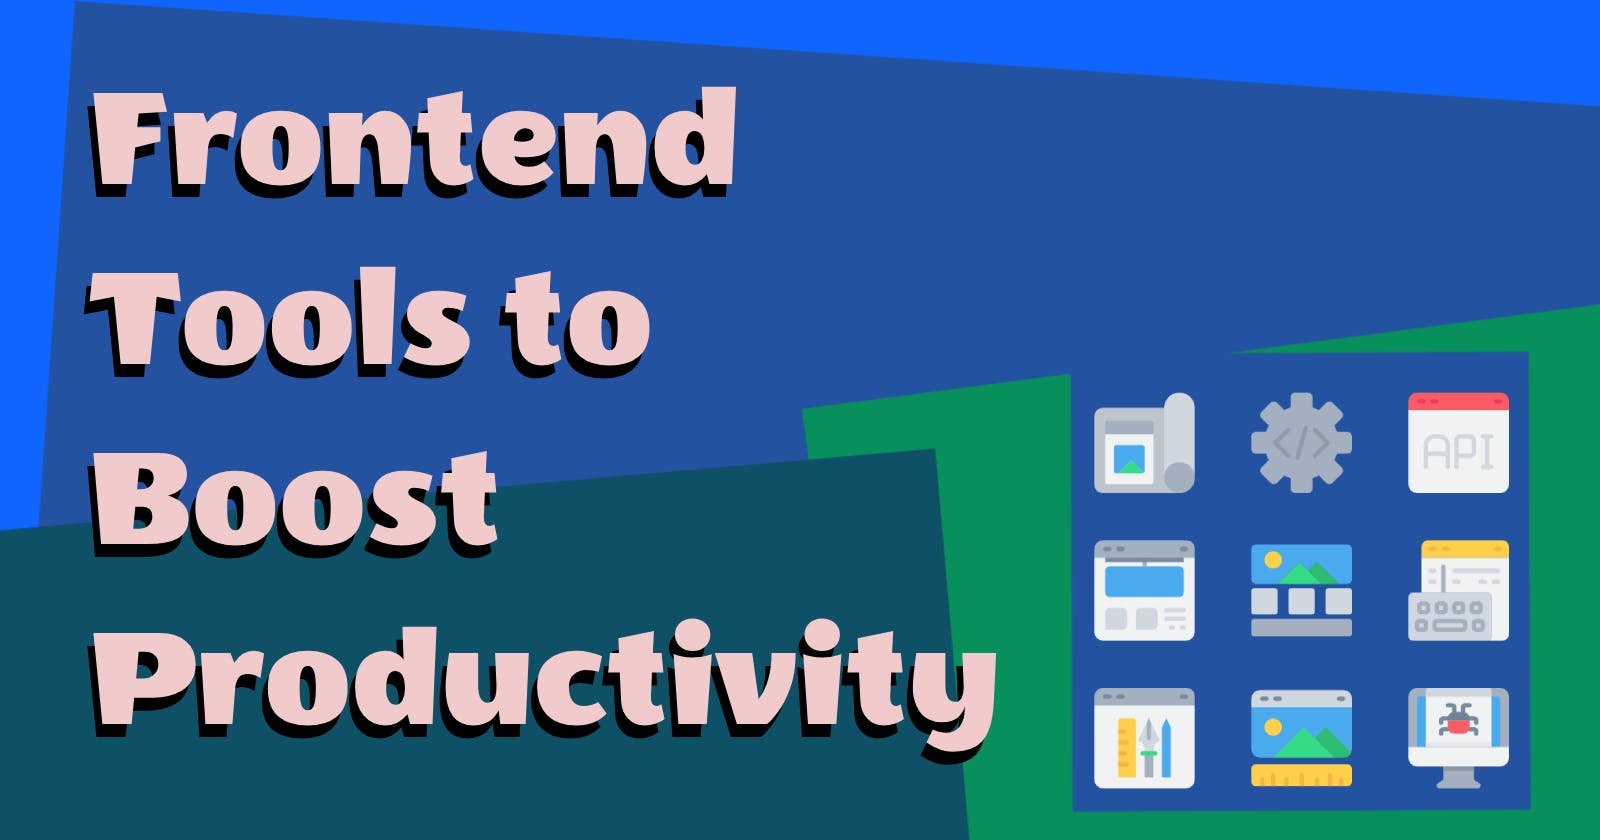 Frontend Tools To Boost Productivity